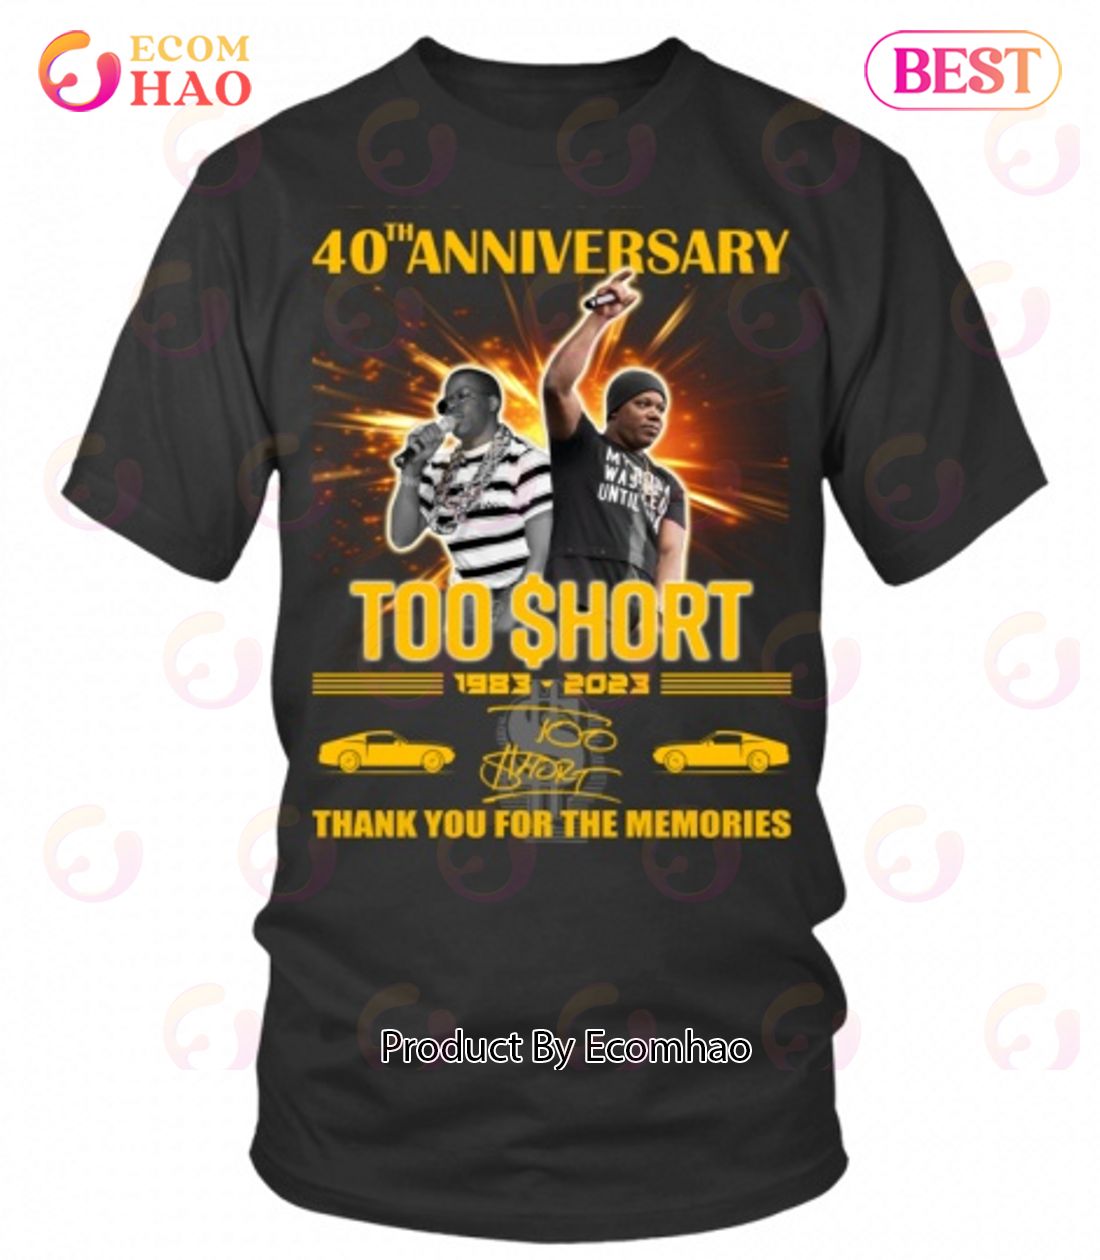 40th Anniversary Too Short 1983 – 2023 Thank You For The Memories T-Shirt